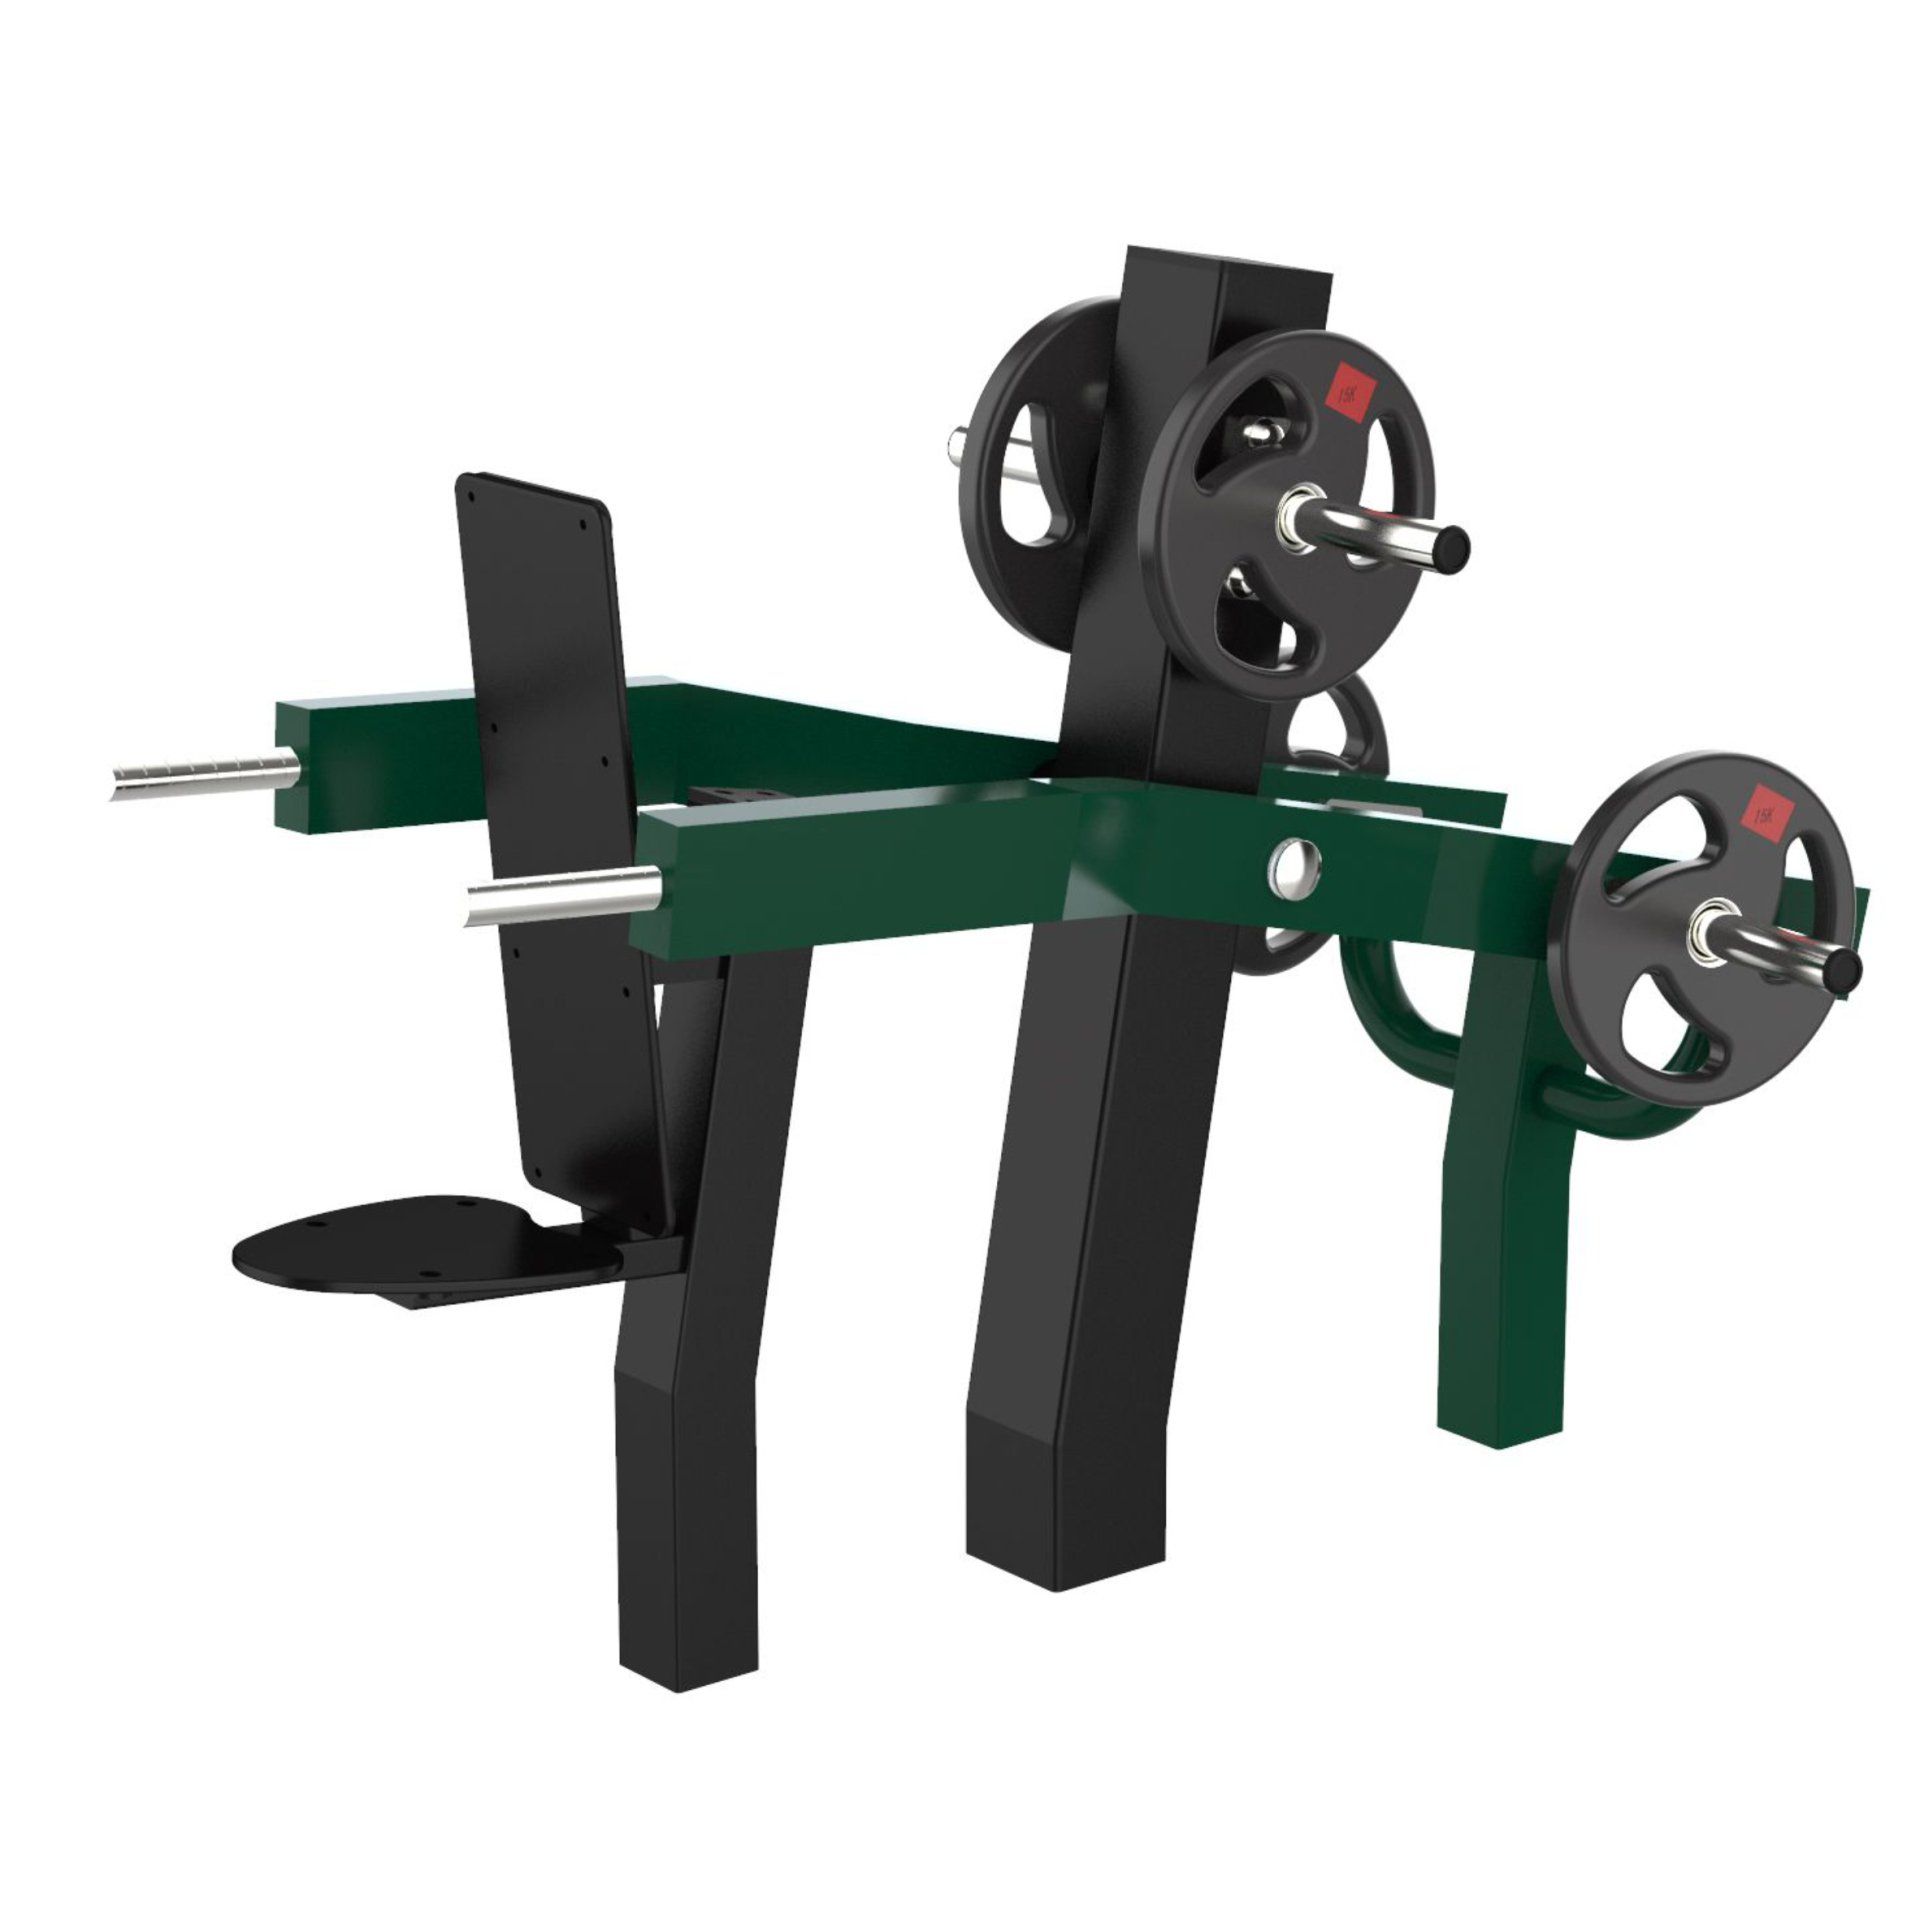 OPTEXI-005 OptiFit Excite Outdoor Plate Loaded Tricep Press